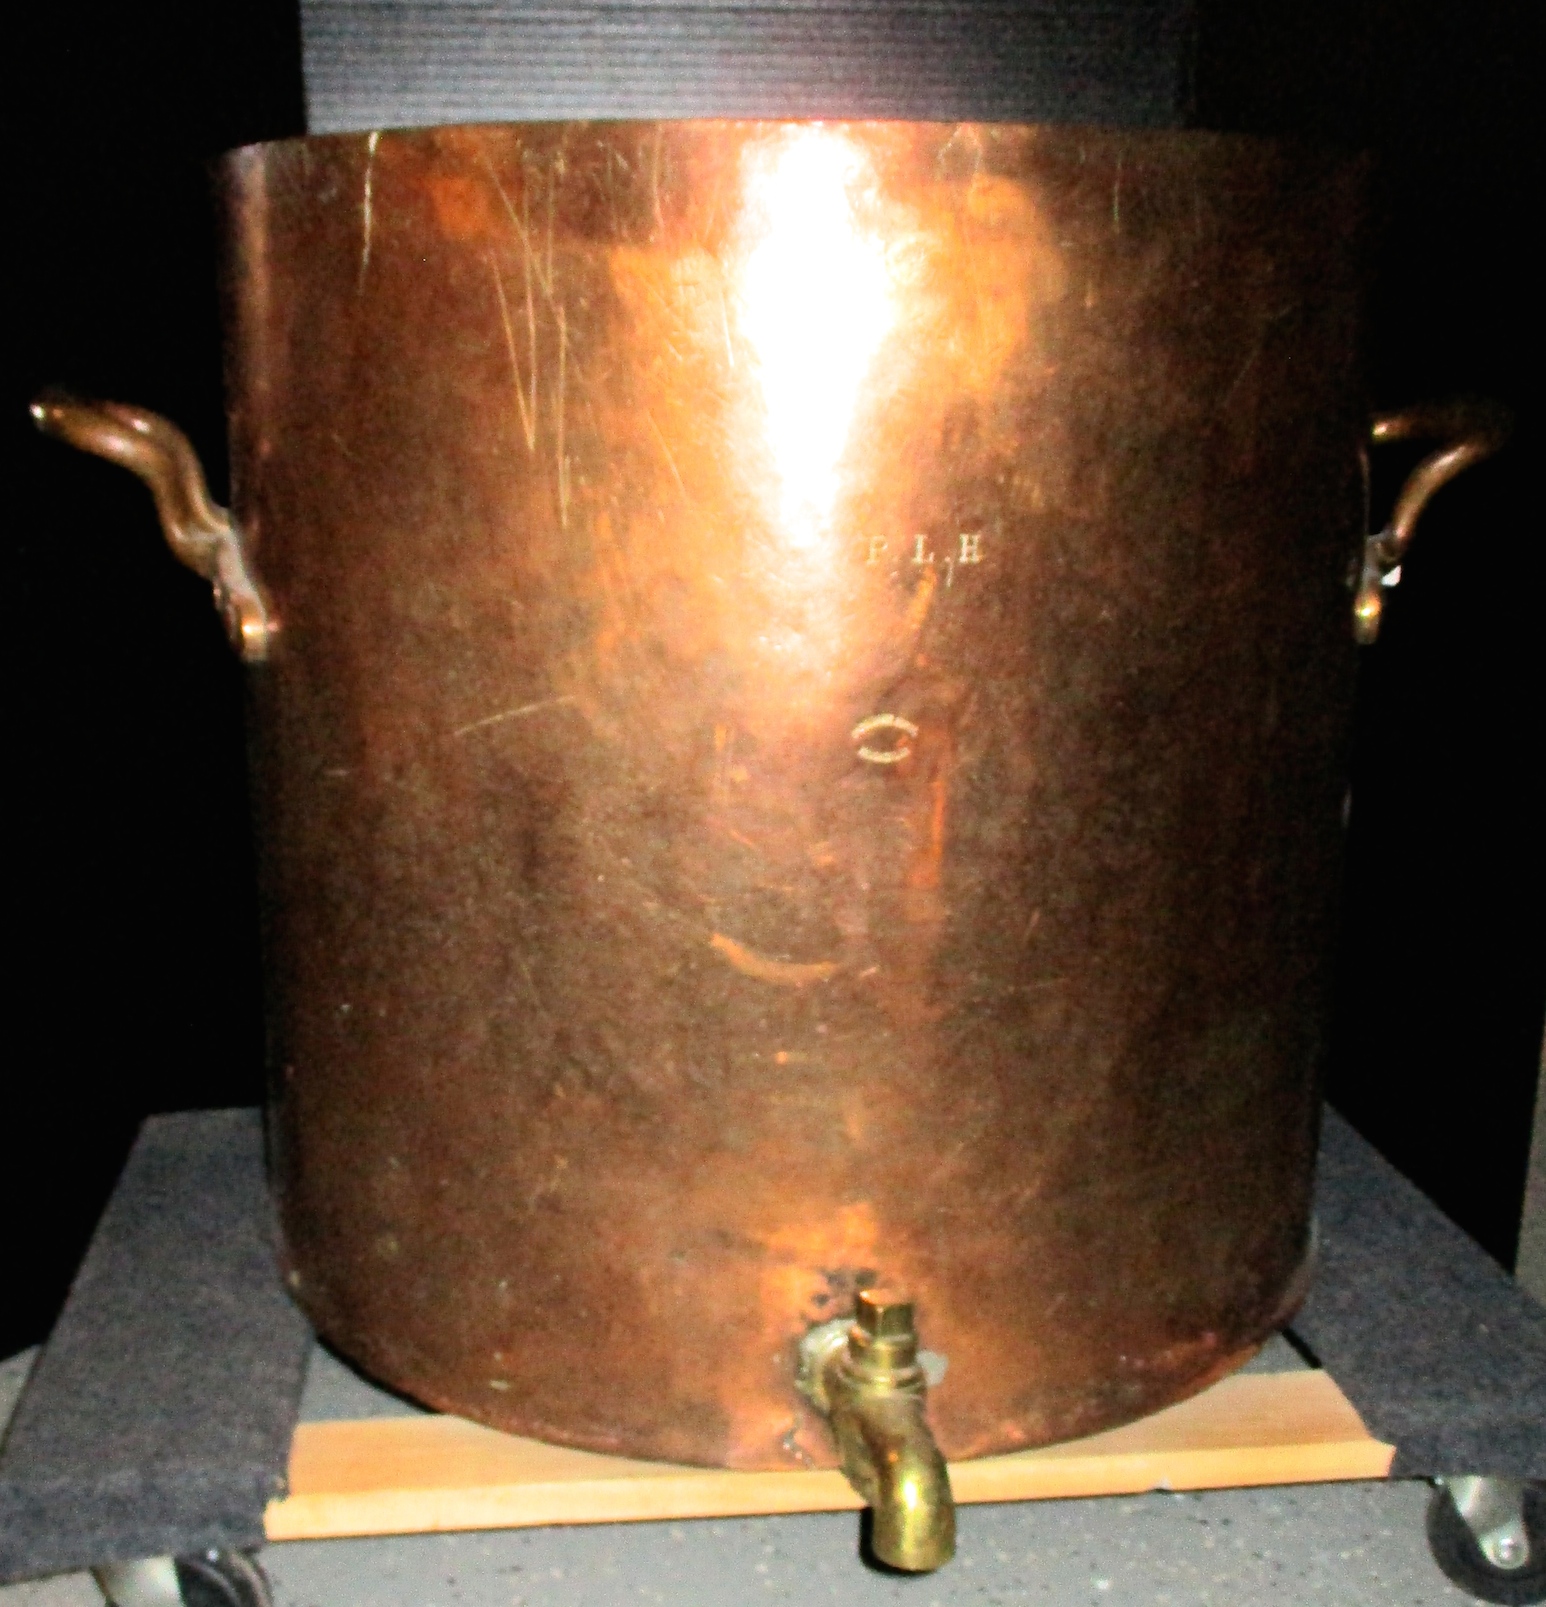 Super Large (22 1/2" H x 22" Dia.) Hotel Kitchen Copper Chef's Stock Pot w/spigot - Marked ParkLand Hotel Piccadilly, London